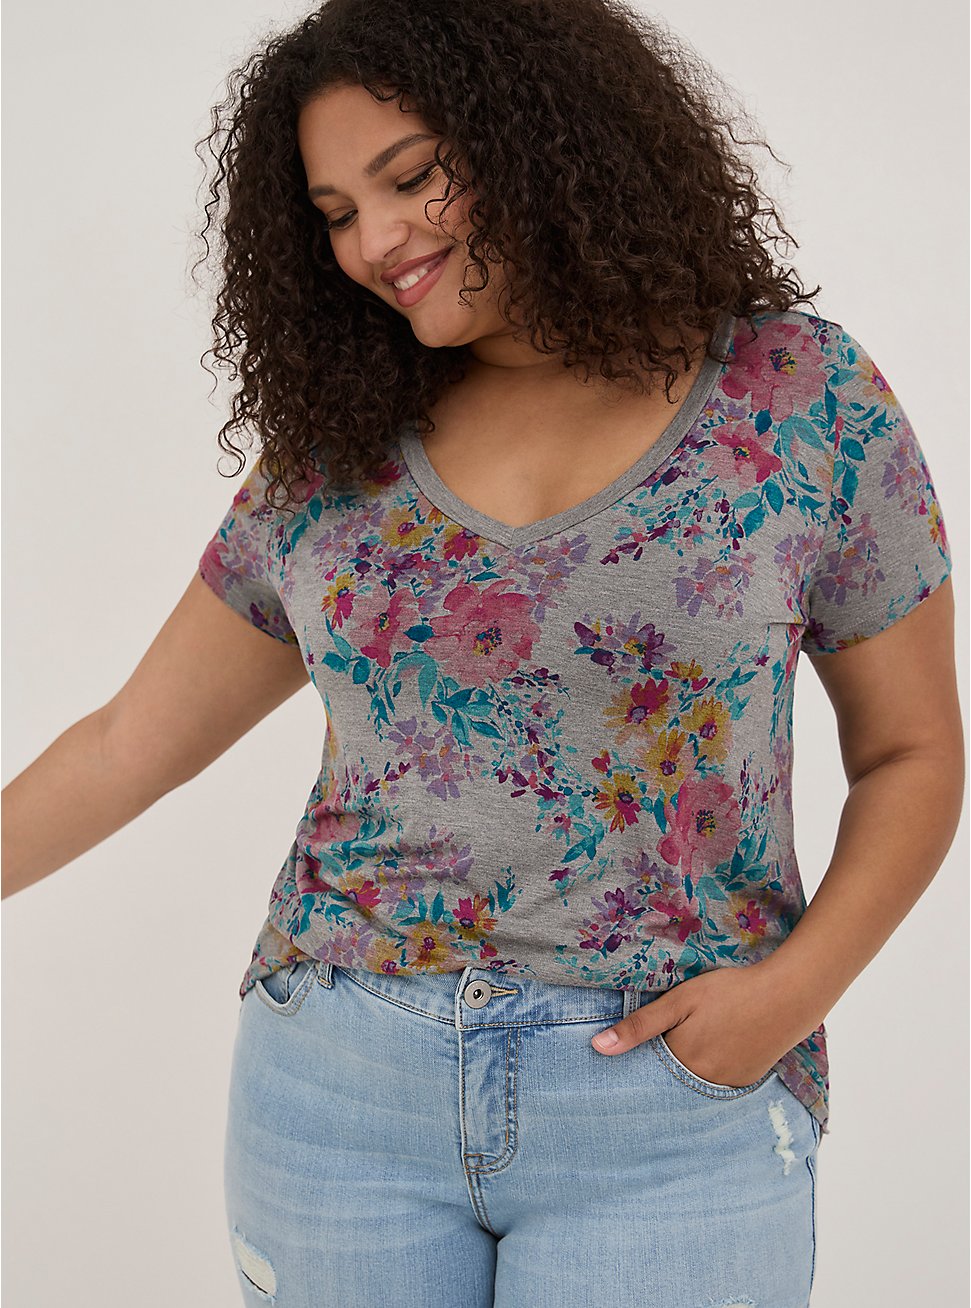 Plus Size Perfect Tee - Super Soft Floral Grey, OTHER PRINTS, hi-res